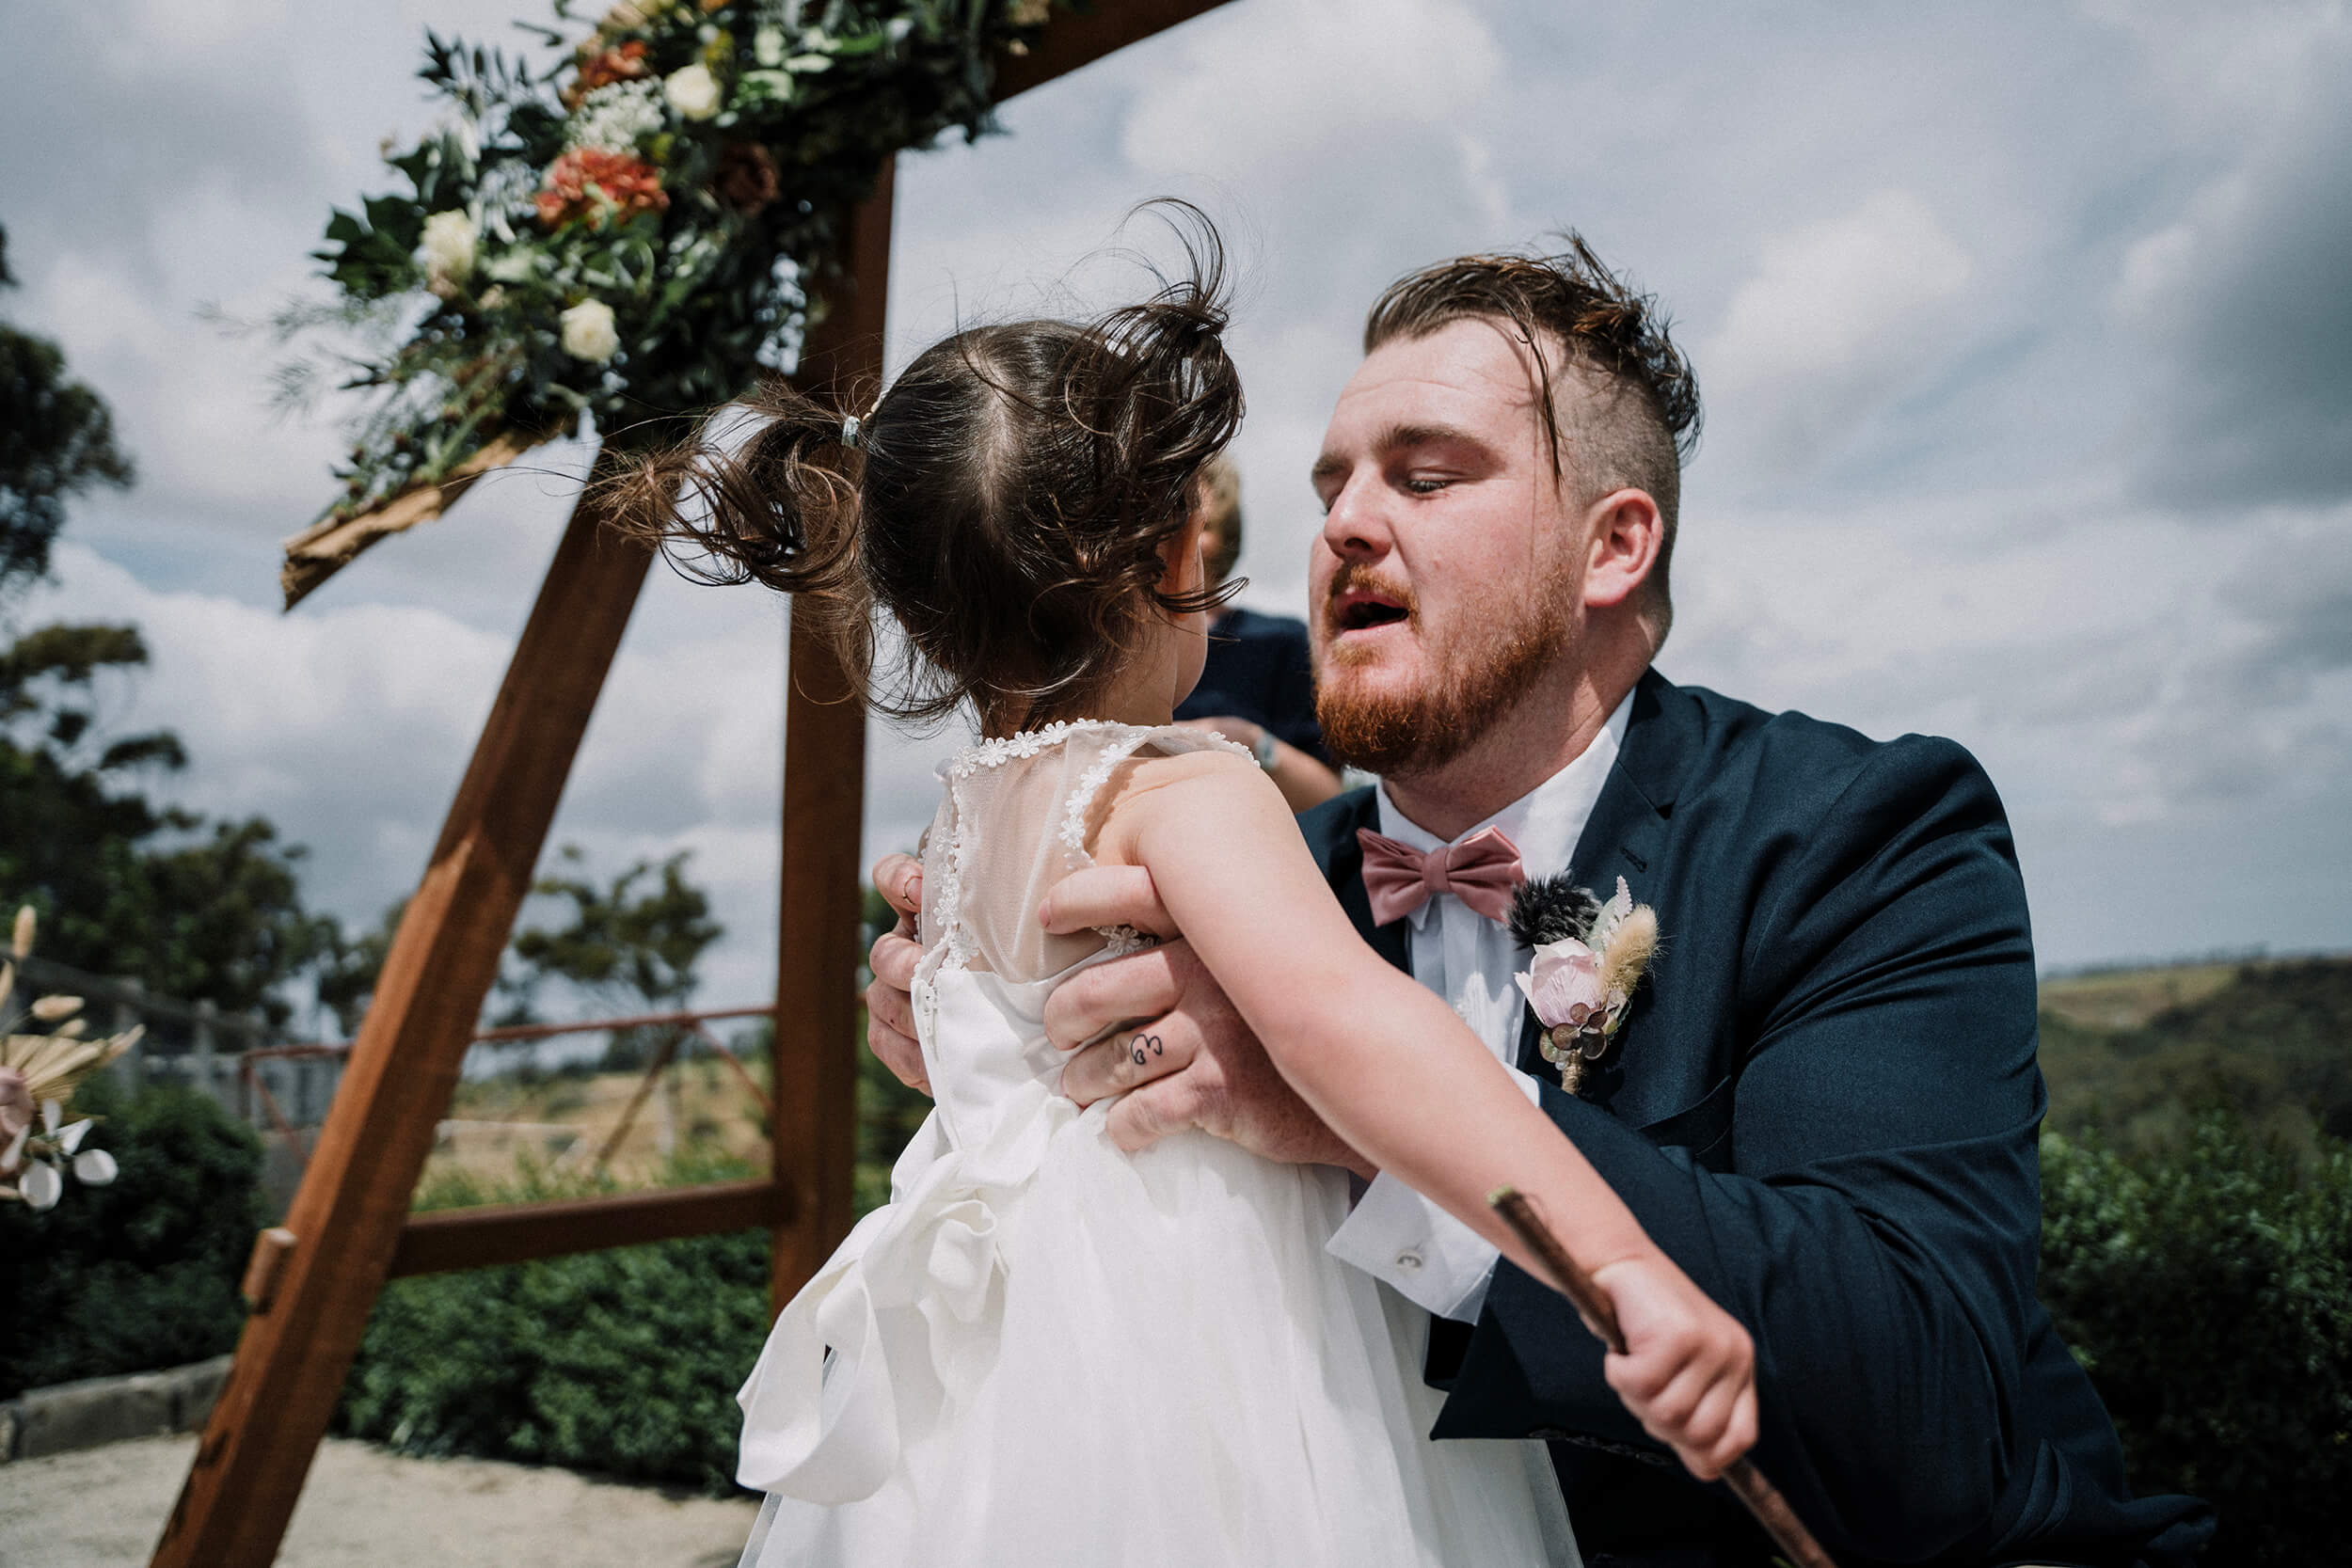 The groom holding his daughter in the ceremony. Photo captured by Black Avenue Productions